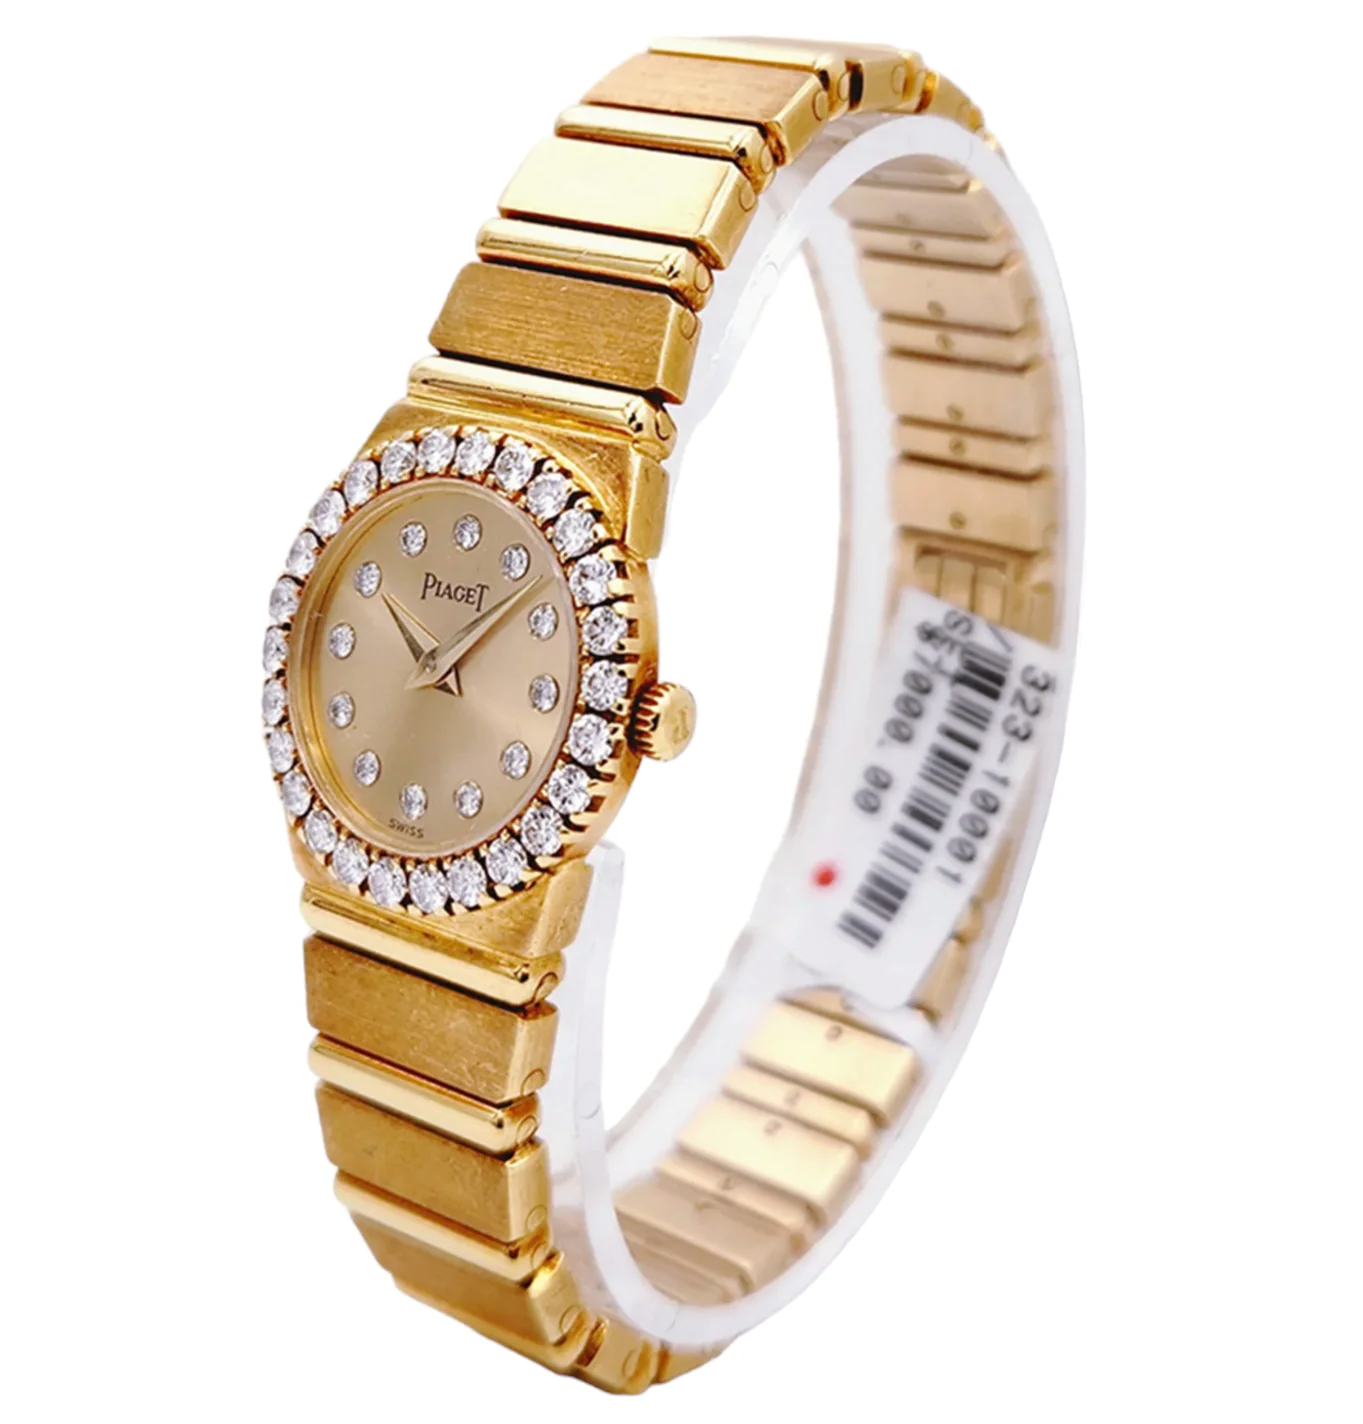 Ladies Piaget Polo 21mm Vintage Solid 18K Yellow Gold Band Watch with Champagne Diamond Dial and Diamond Bezel. (Pre-Owned)